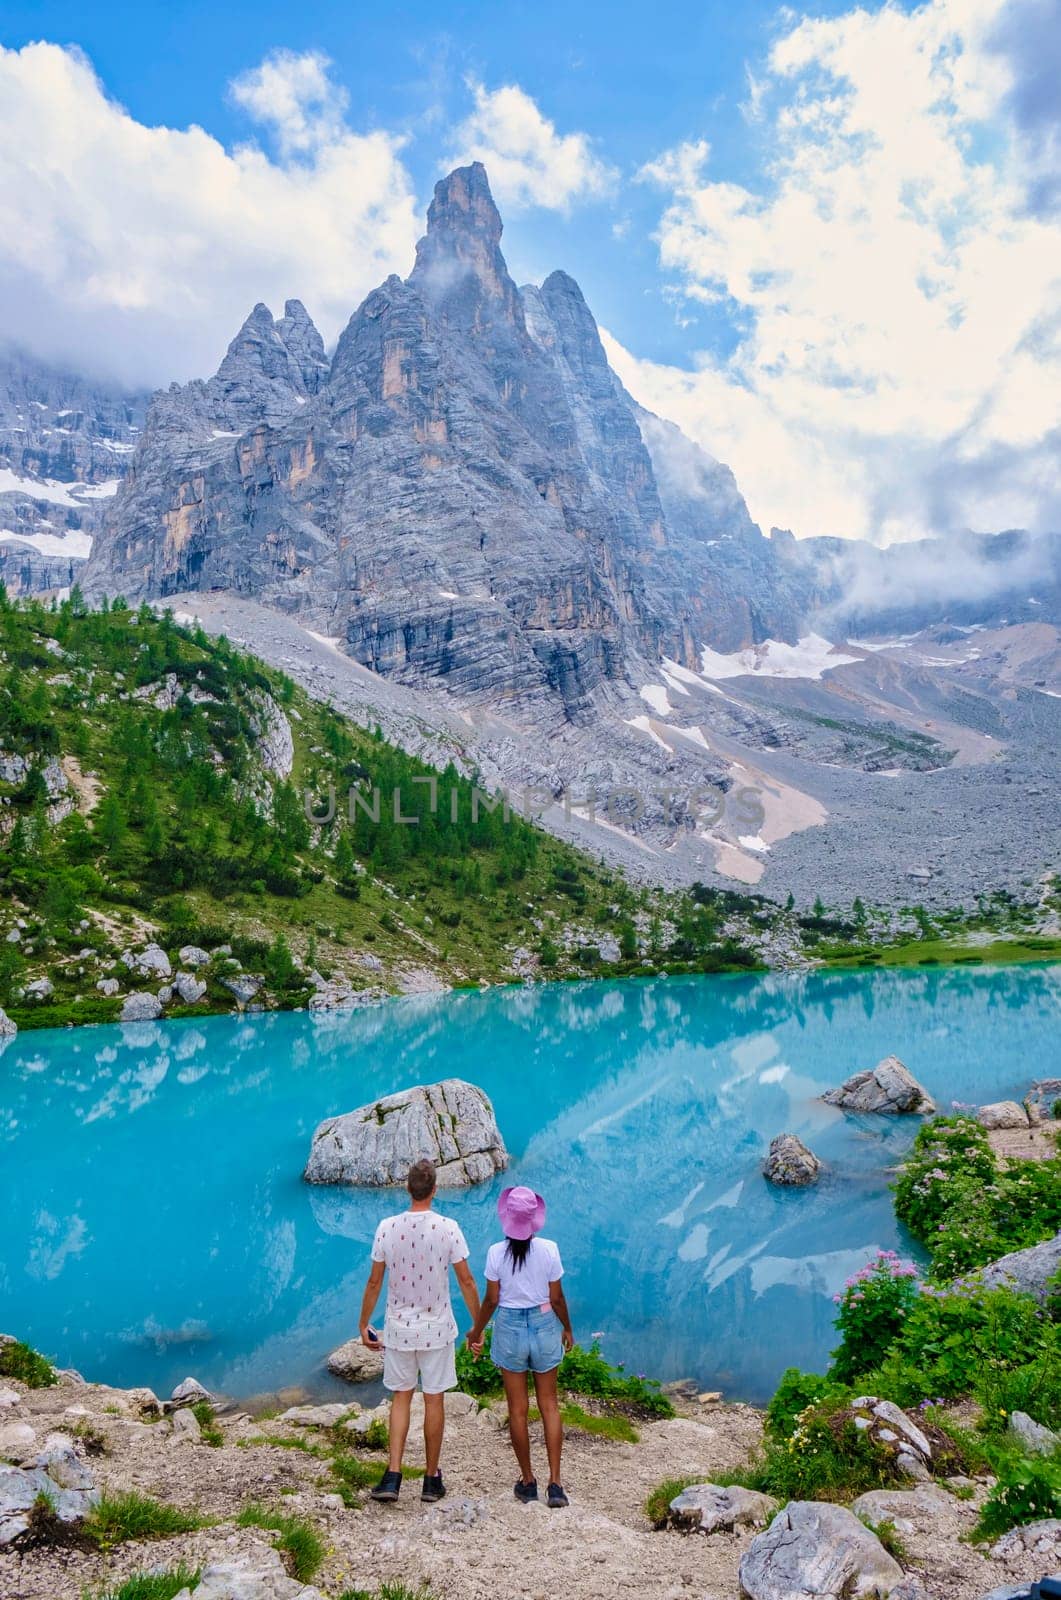 Lago di Sorapis in the Italian Dolomites, milky blue lake Lago di Sorapis, Lake Sorapis, Dolomites, Italy during summer, couple hiking in the Italian mountains of the Dolomites during summer holidays